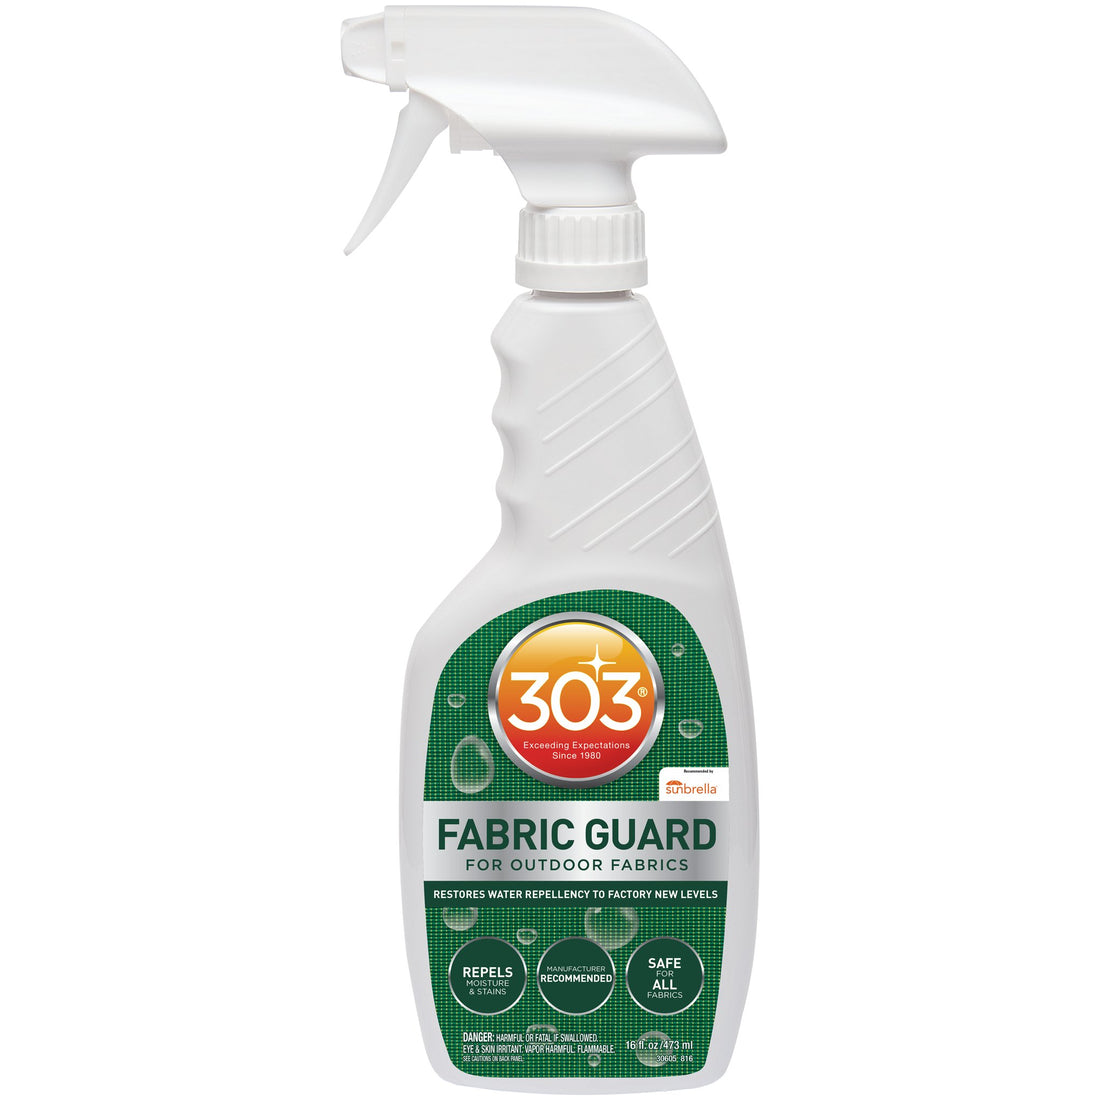 303 High-Tech Fabric Guard Water Repellent (4 Sizes)